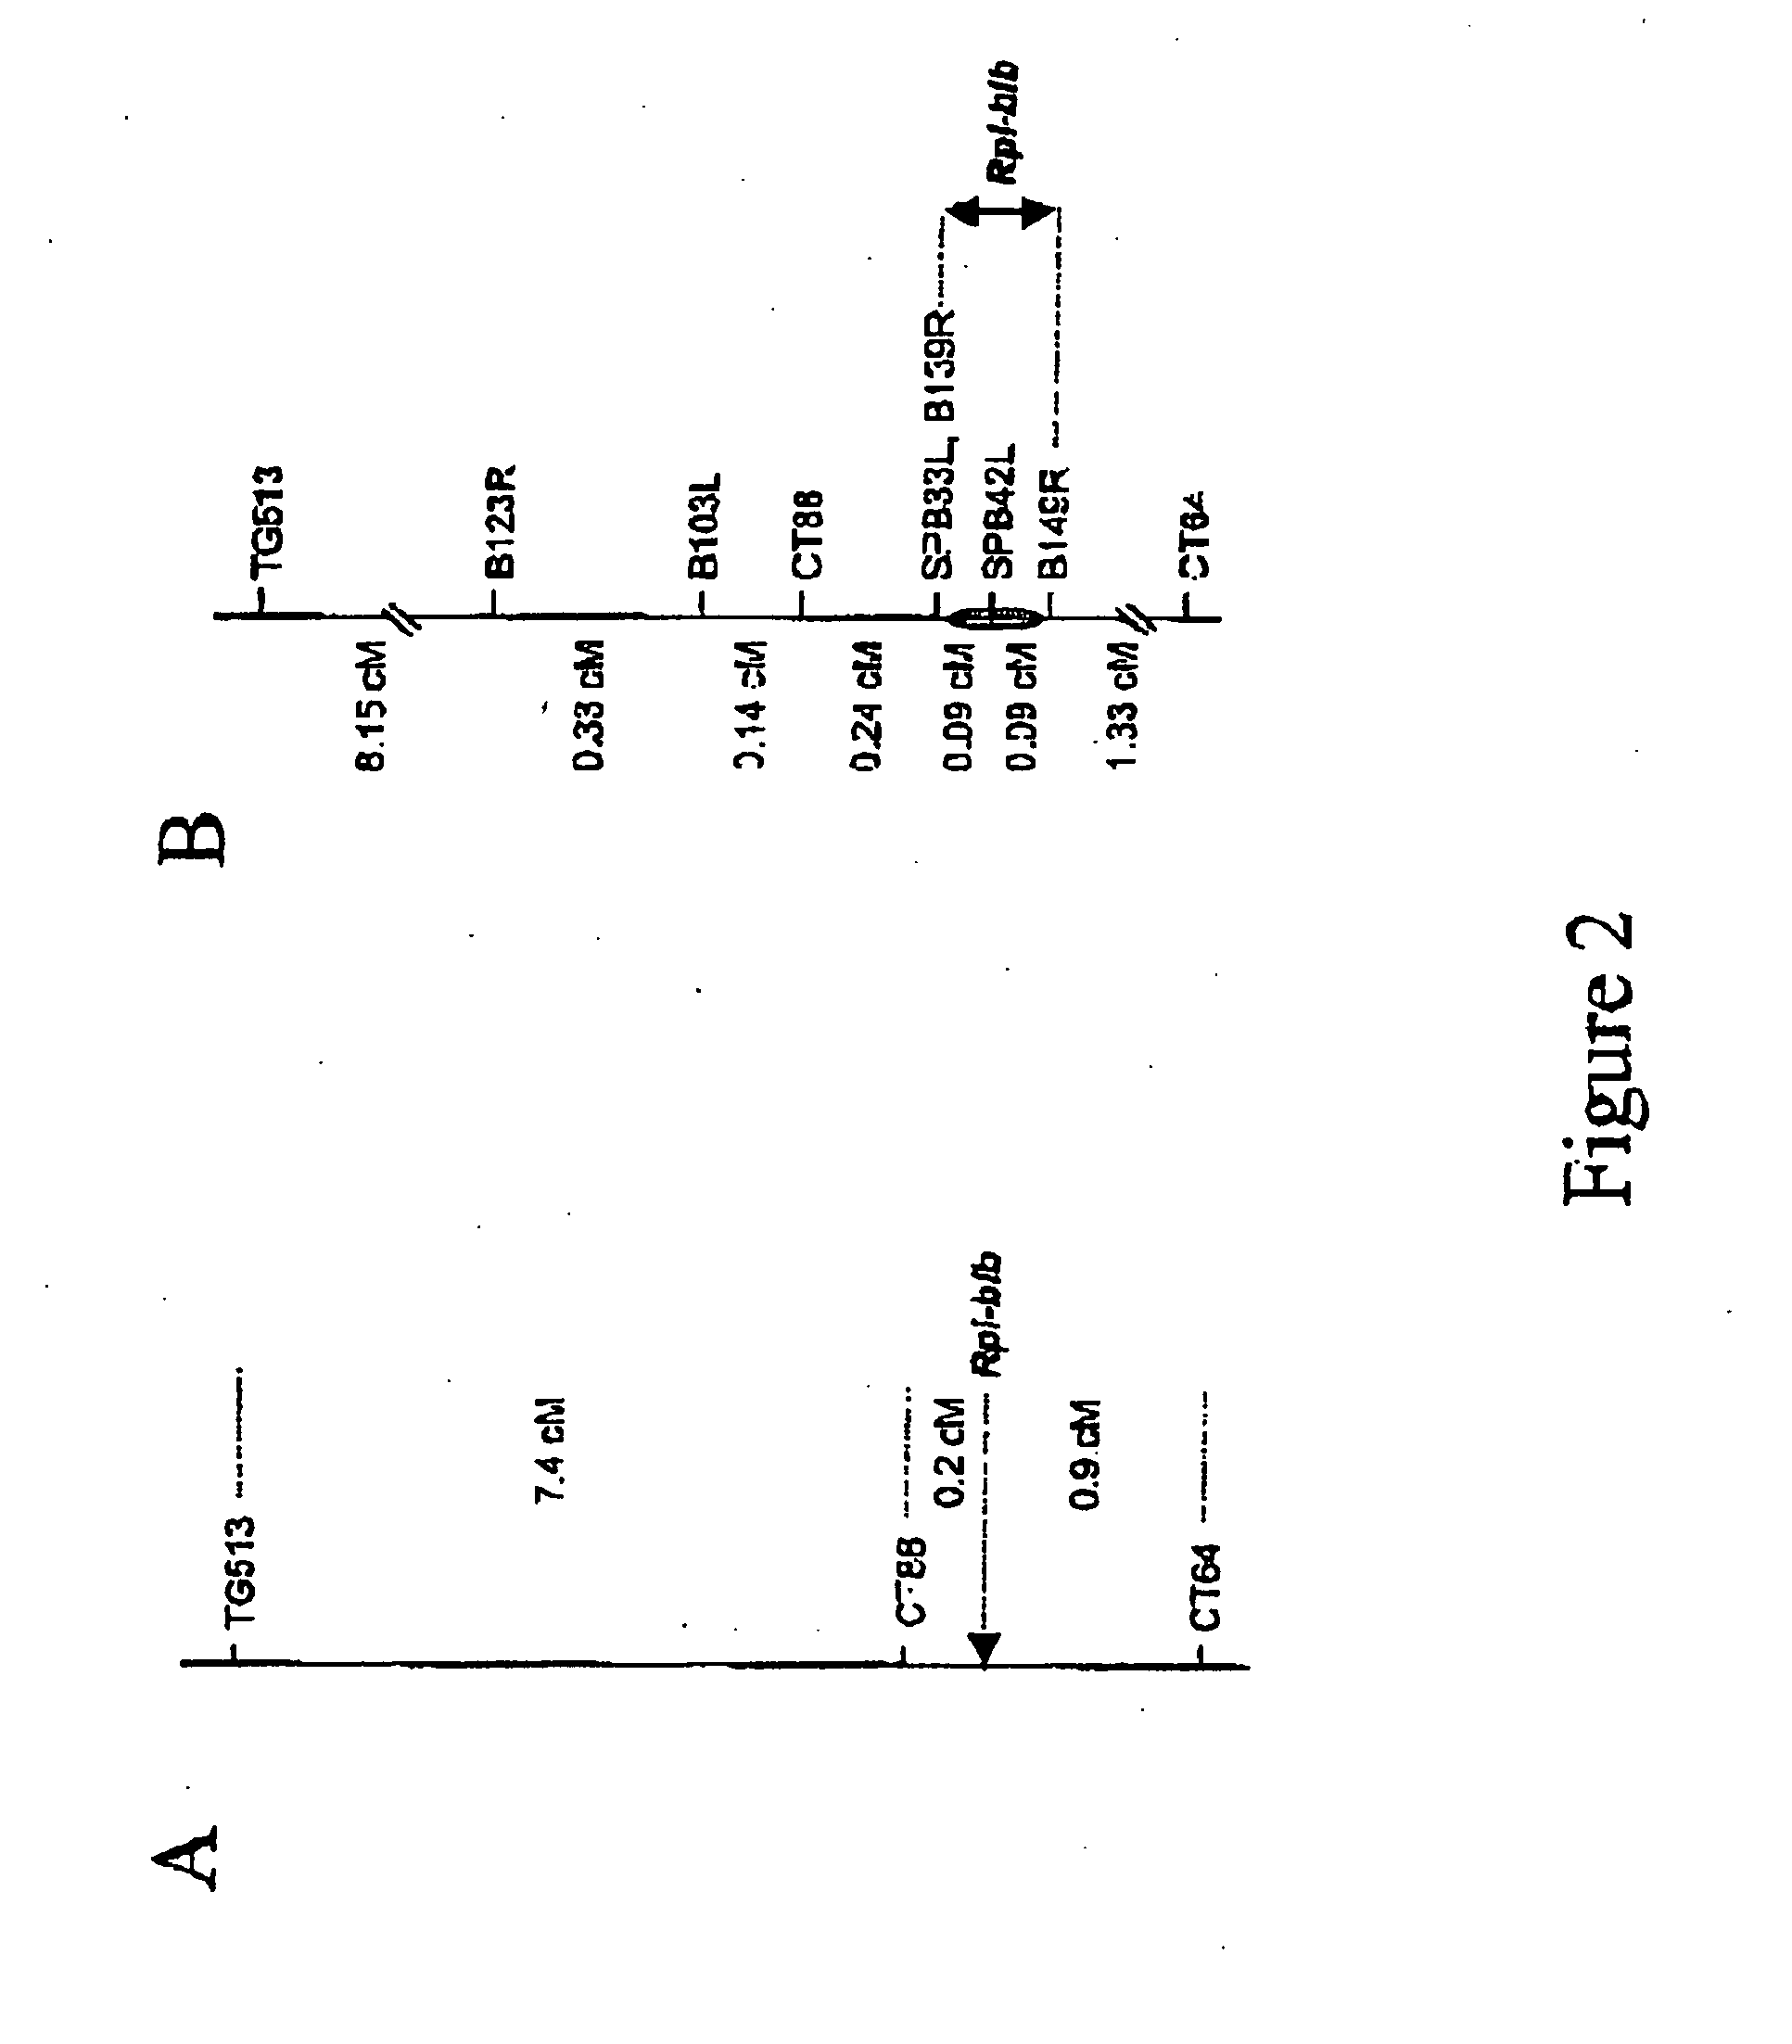 Isolated nucleic acids encoding resistance polypeptides and uses thereof